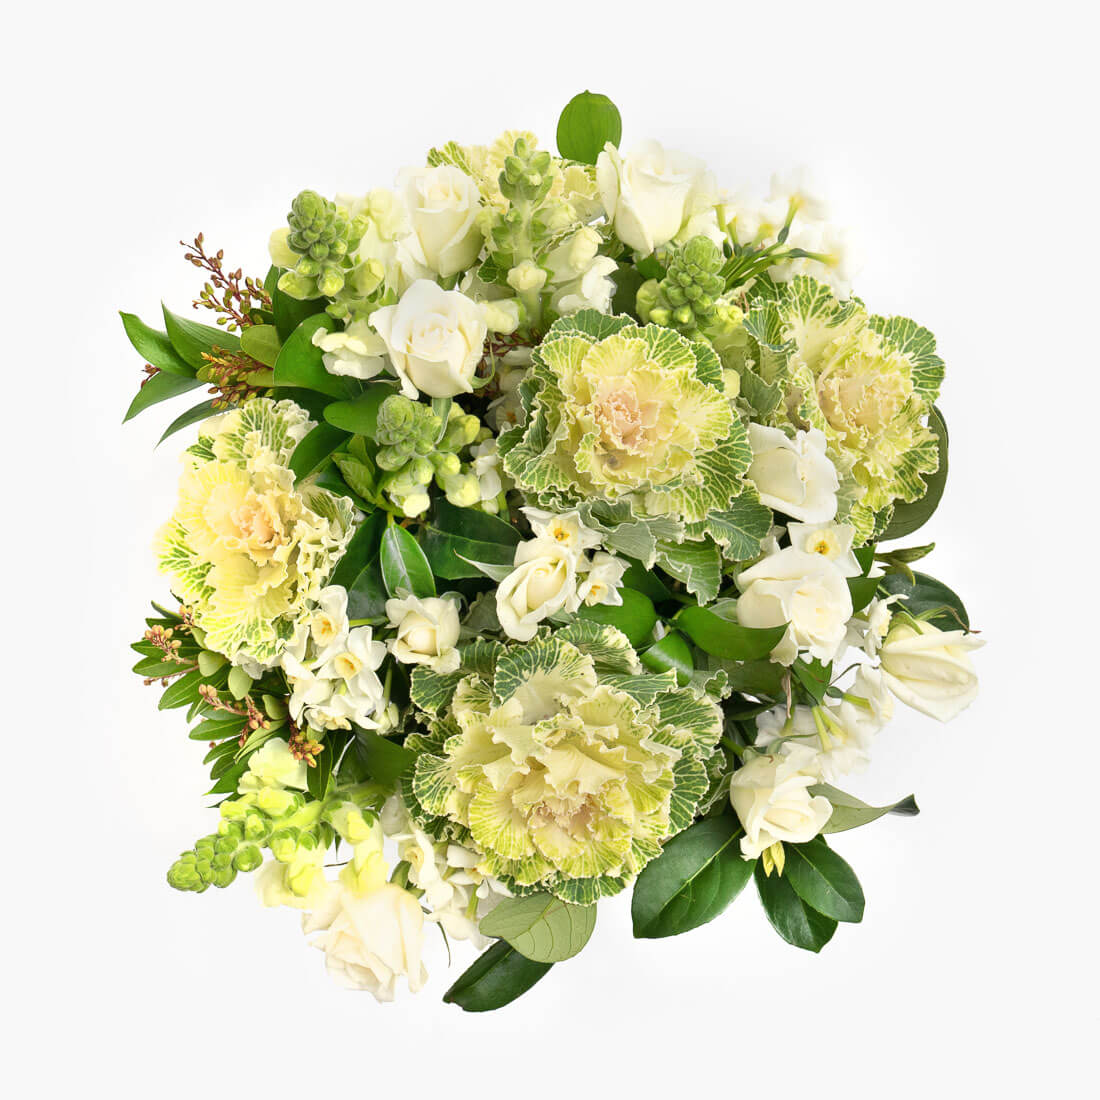 Geelong white and green sympathy flower arrangement delivered